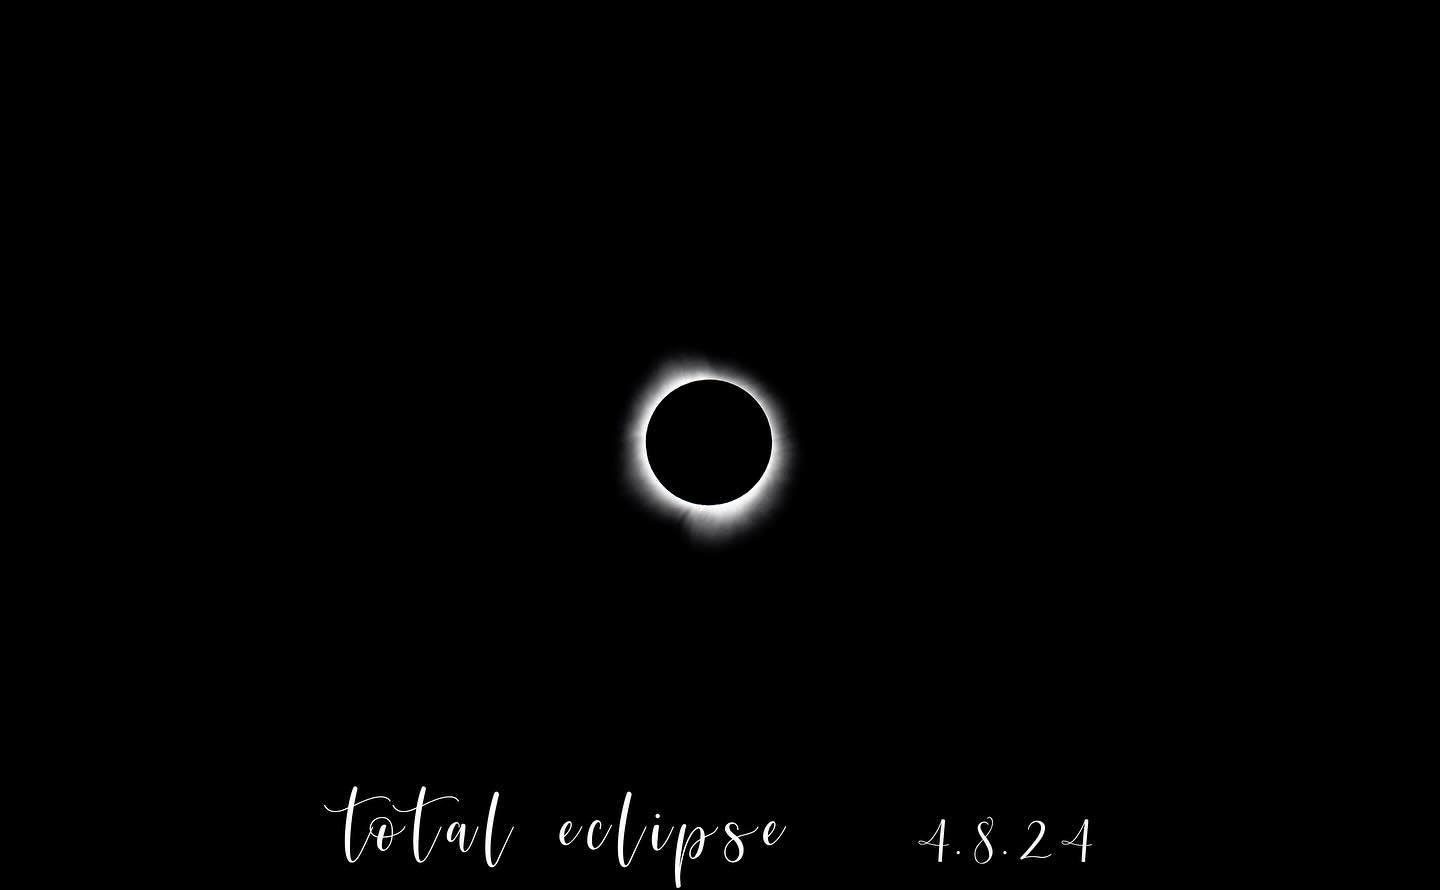 An experience that was so cool to see!! We were in totality!  To see it get dark and light again was awesome!!

#totaleclipse #eclipse #eclipse2024 #eclipse2024🌘